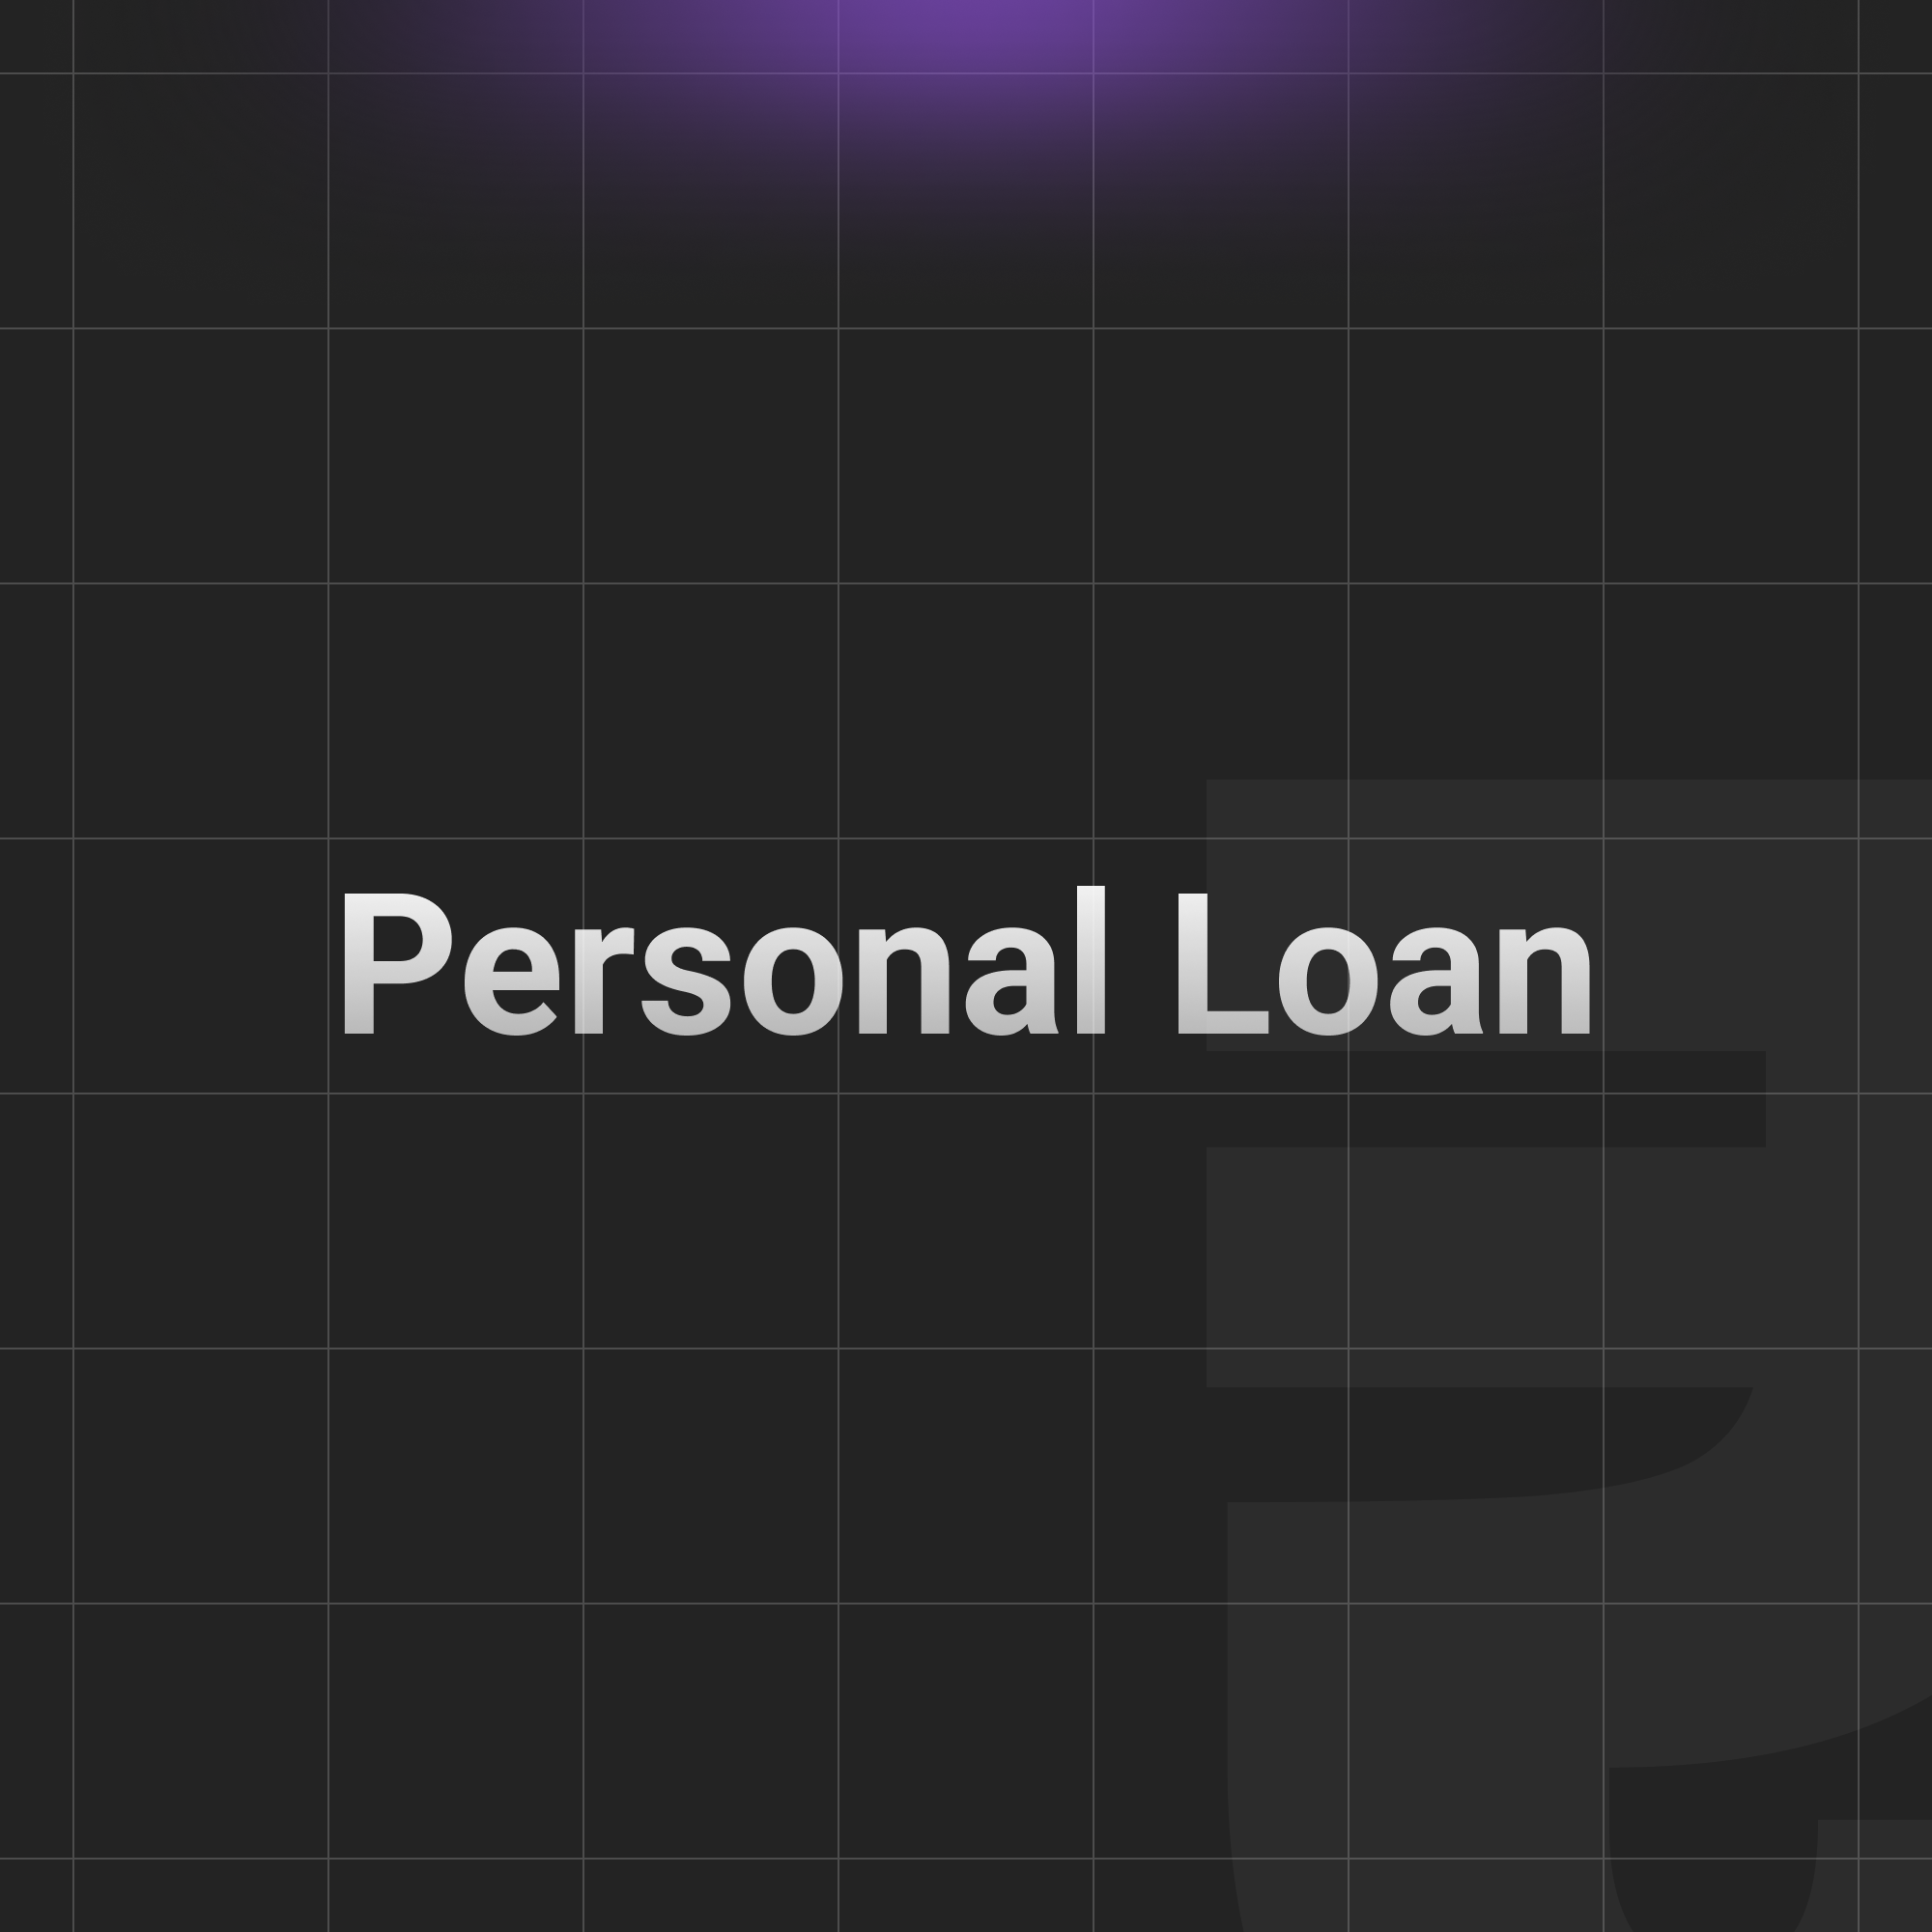 Personal Loans- Types, benefits, what to do before borrowing?